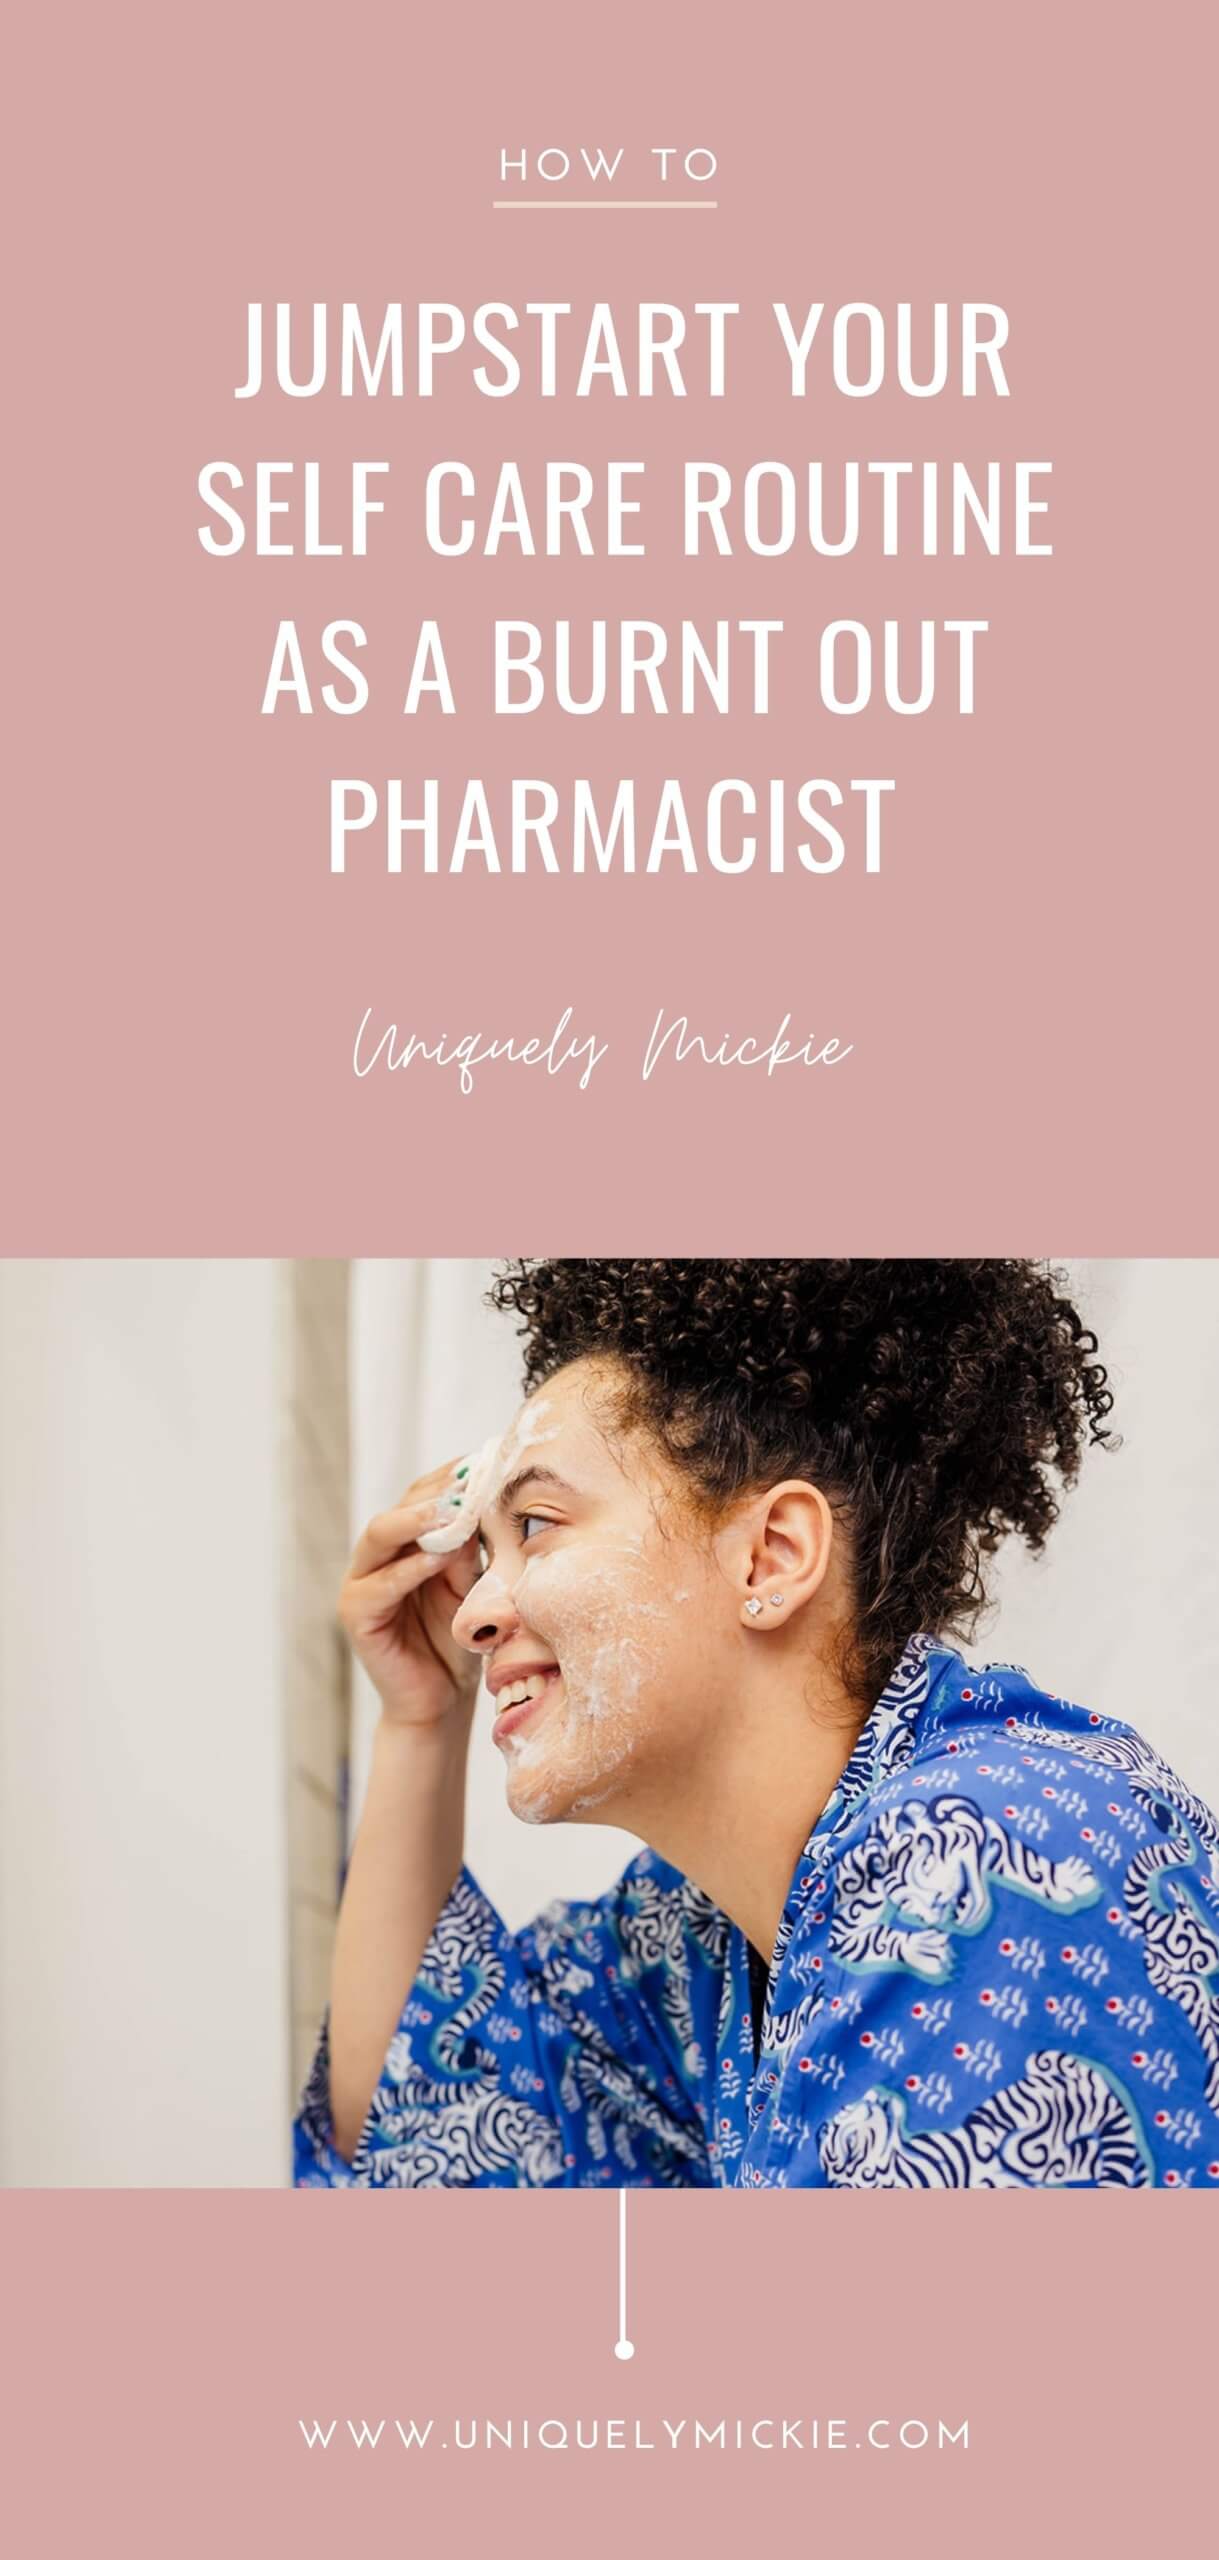 Self Care Ideas for the Burnout Pharmacist